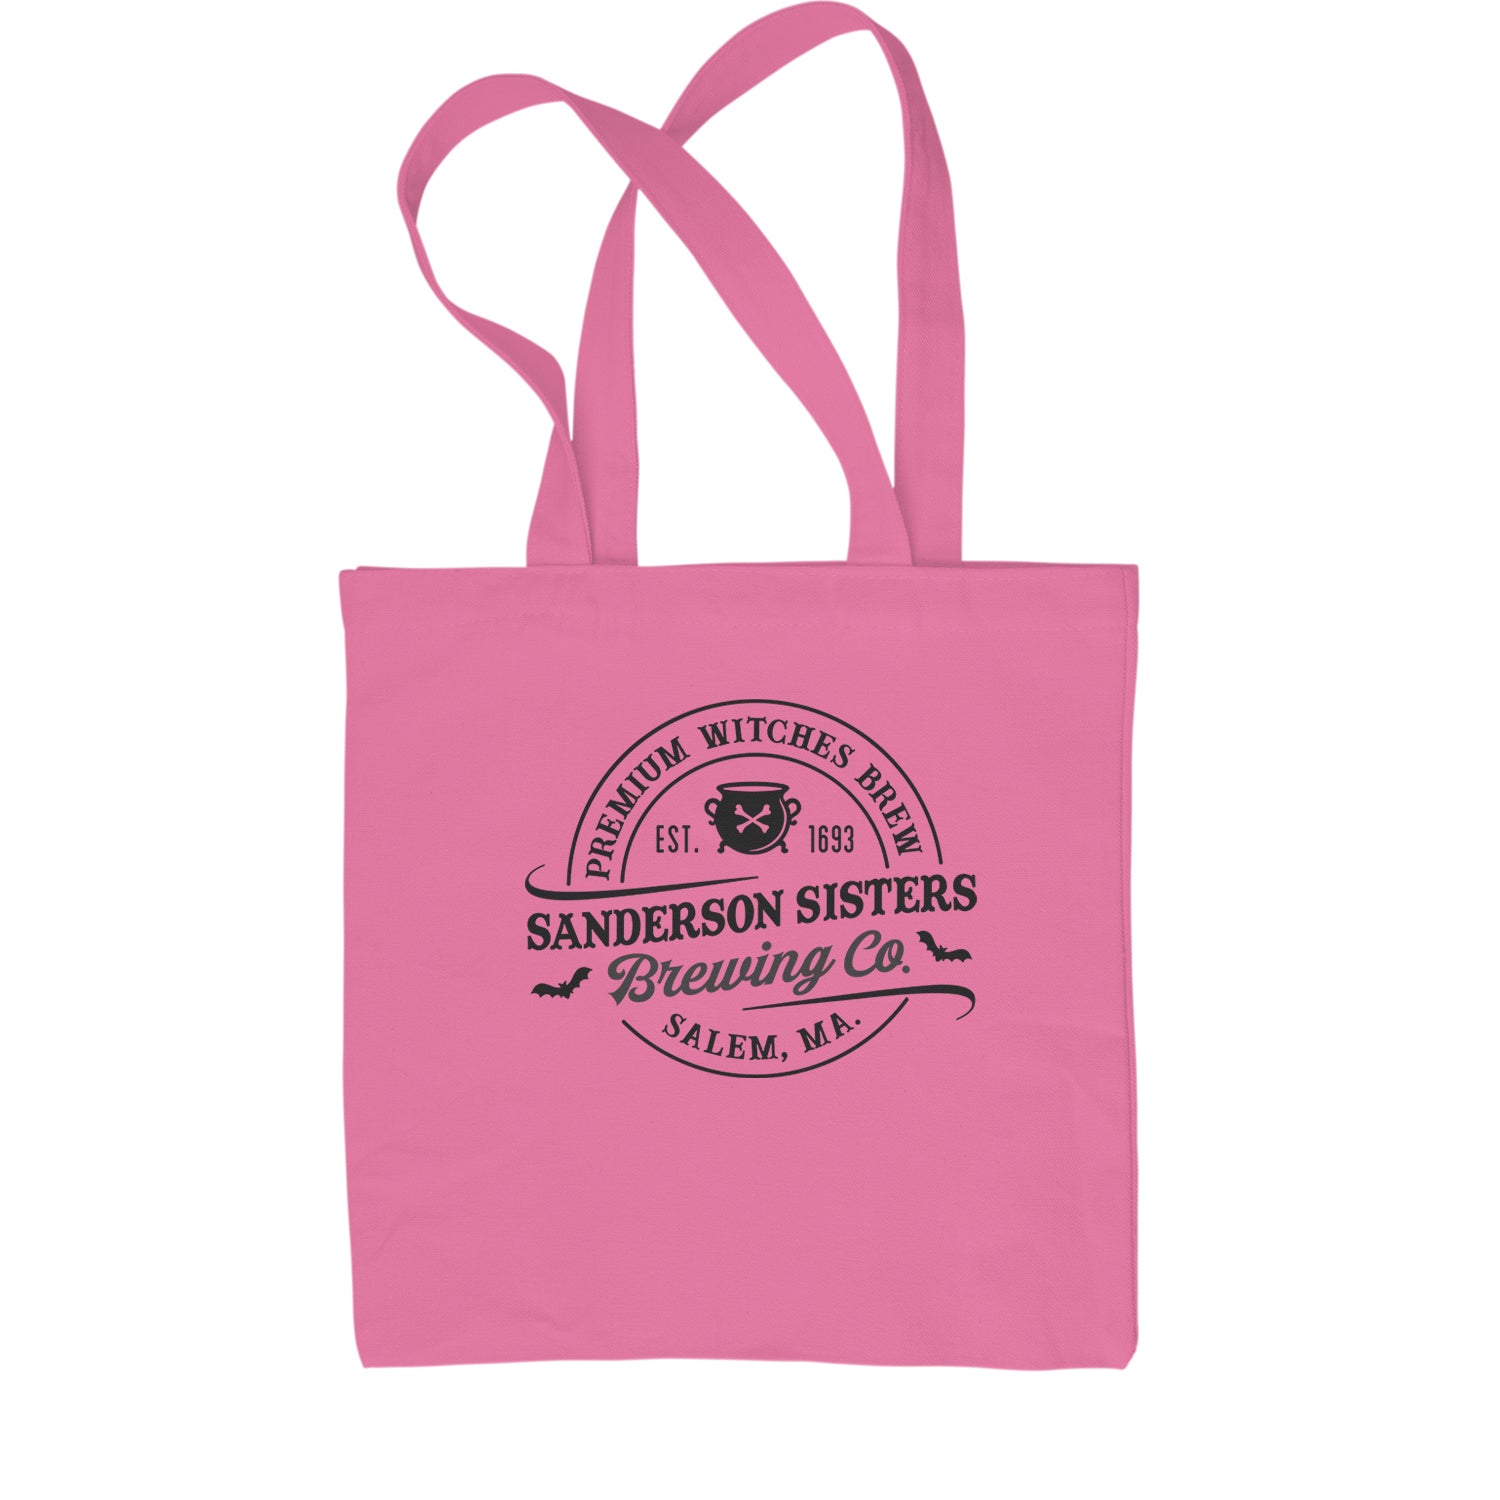 Sanderson Sisters Brewing Company Witches Brew Shopping Tote Bag descendants, enchanted, eve, hallows, hocus, or, pocus, sanderson, sisters, treat, trick, witches by Expression Tees